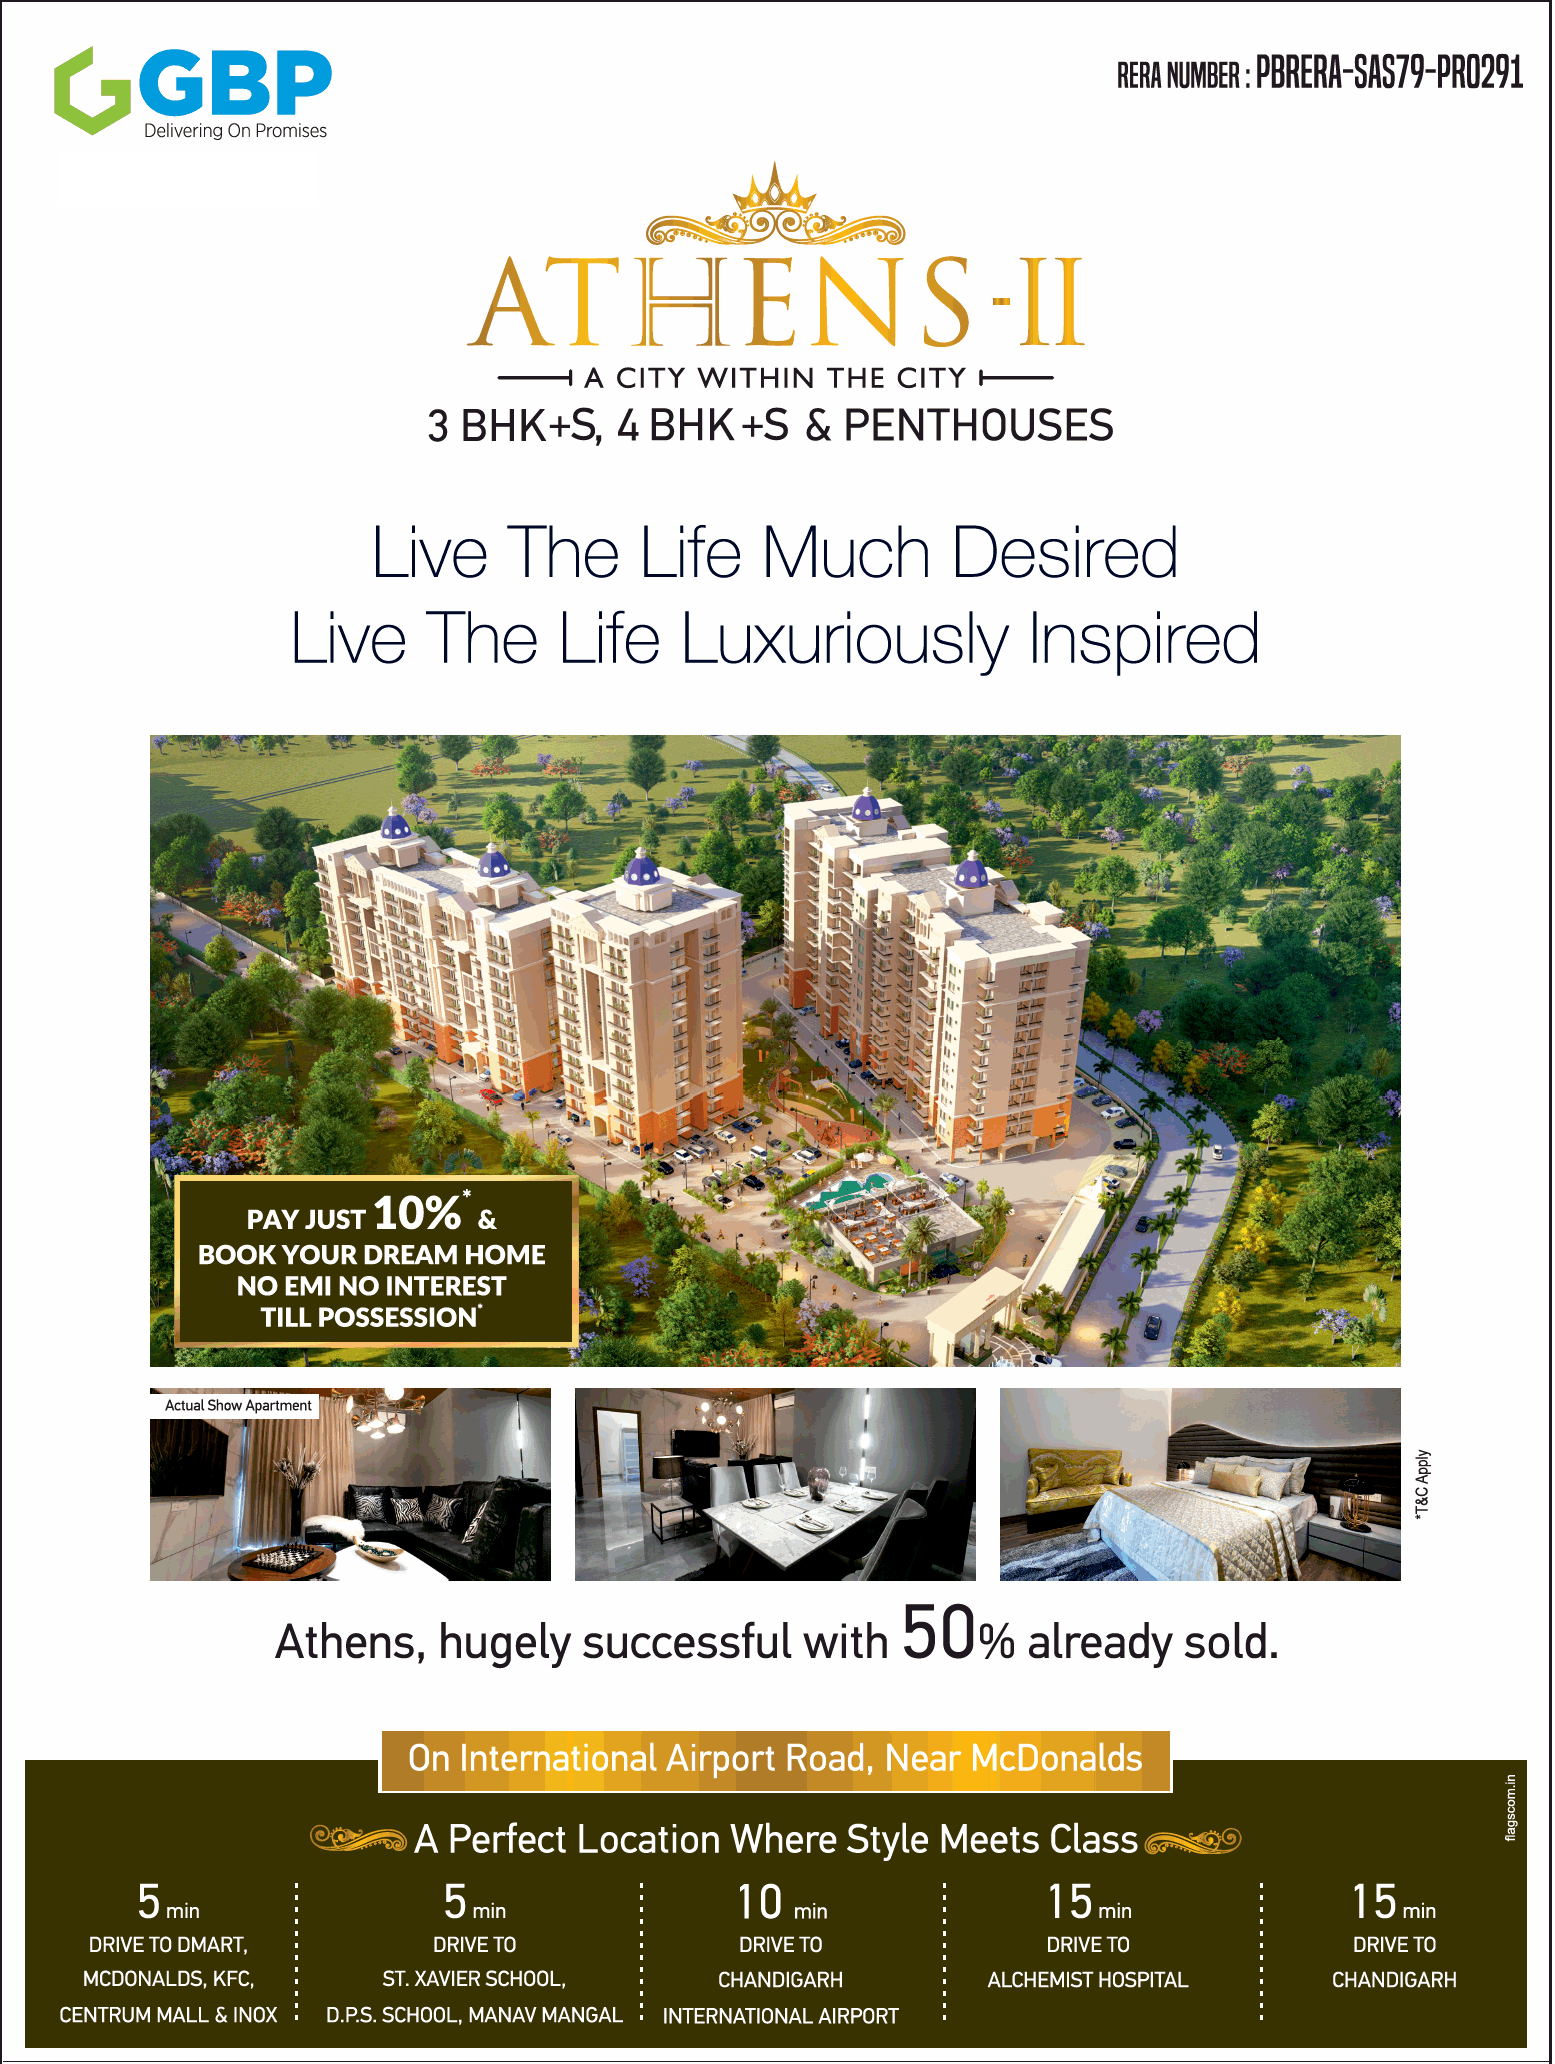 Pay 10% and No EMI Till Possession at GBP Athens, Chandigarh Update